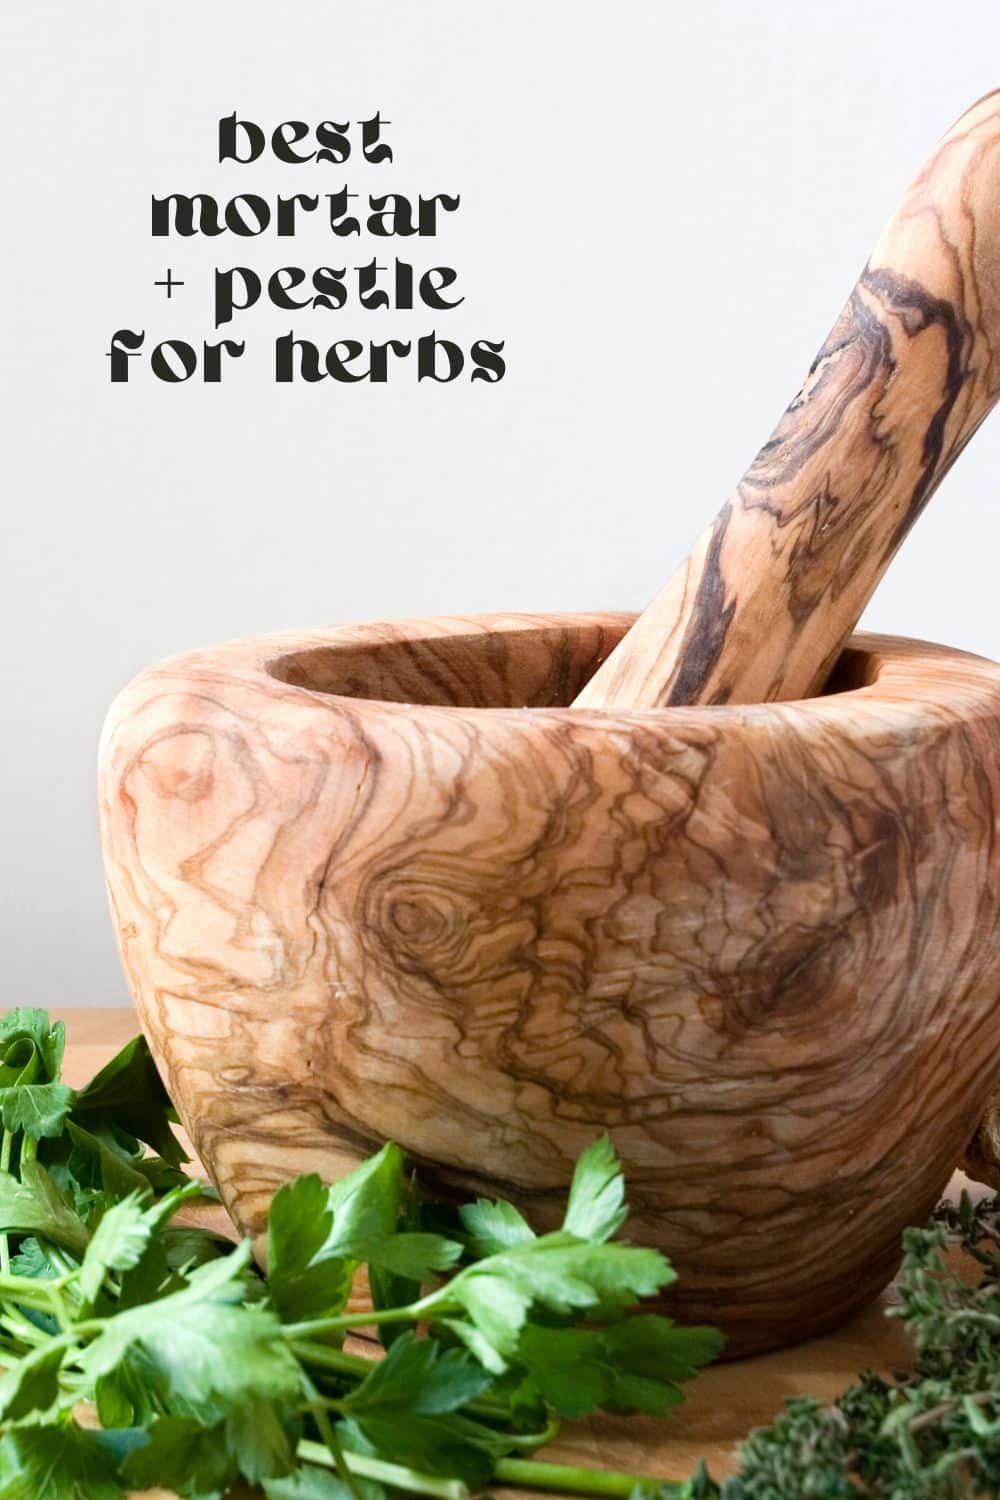 A mortar and pestle is an ancient tool used to grind herbs, spices, and other solid ingredients into powders or pastes. Today, it remains a popular choice for cooking enthusiasts looking to get the most flavor out of their ingredients. 